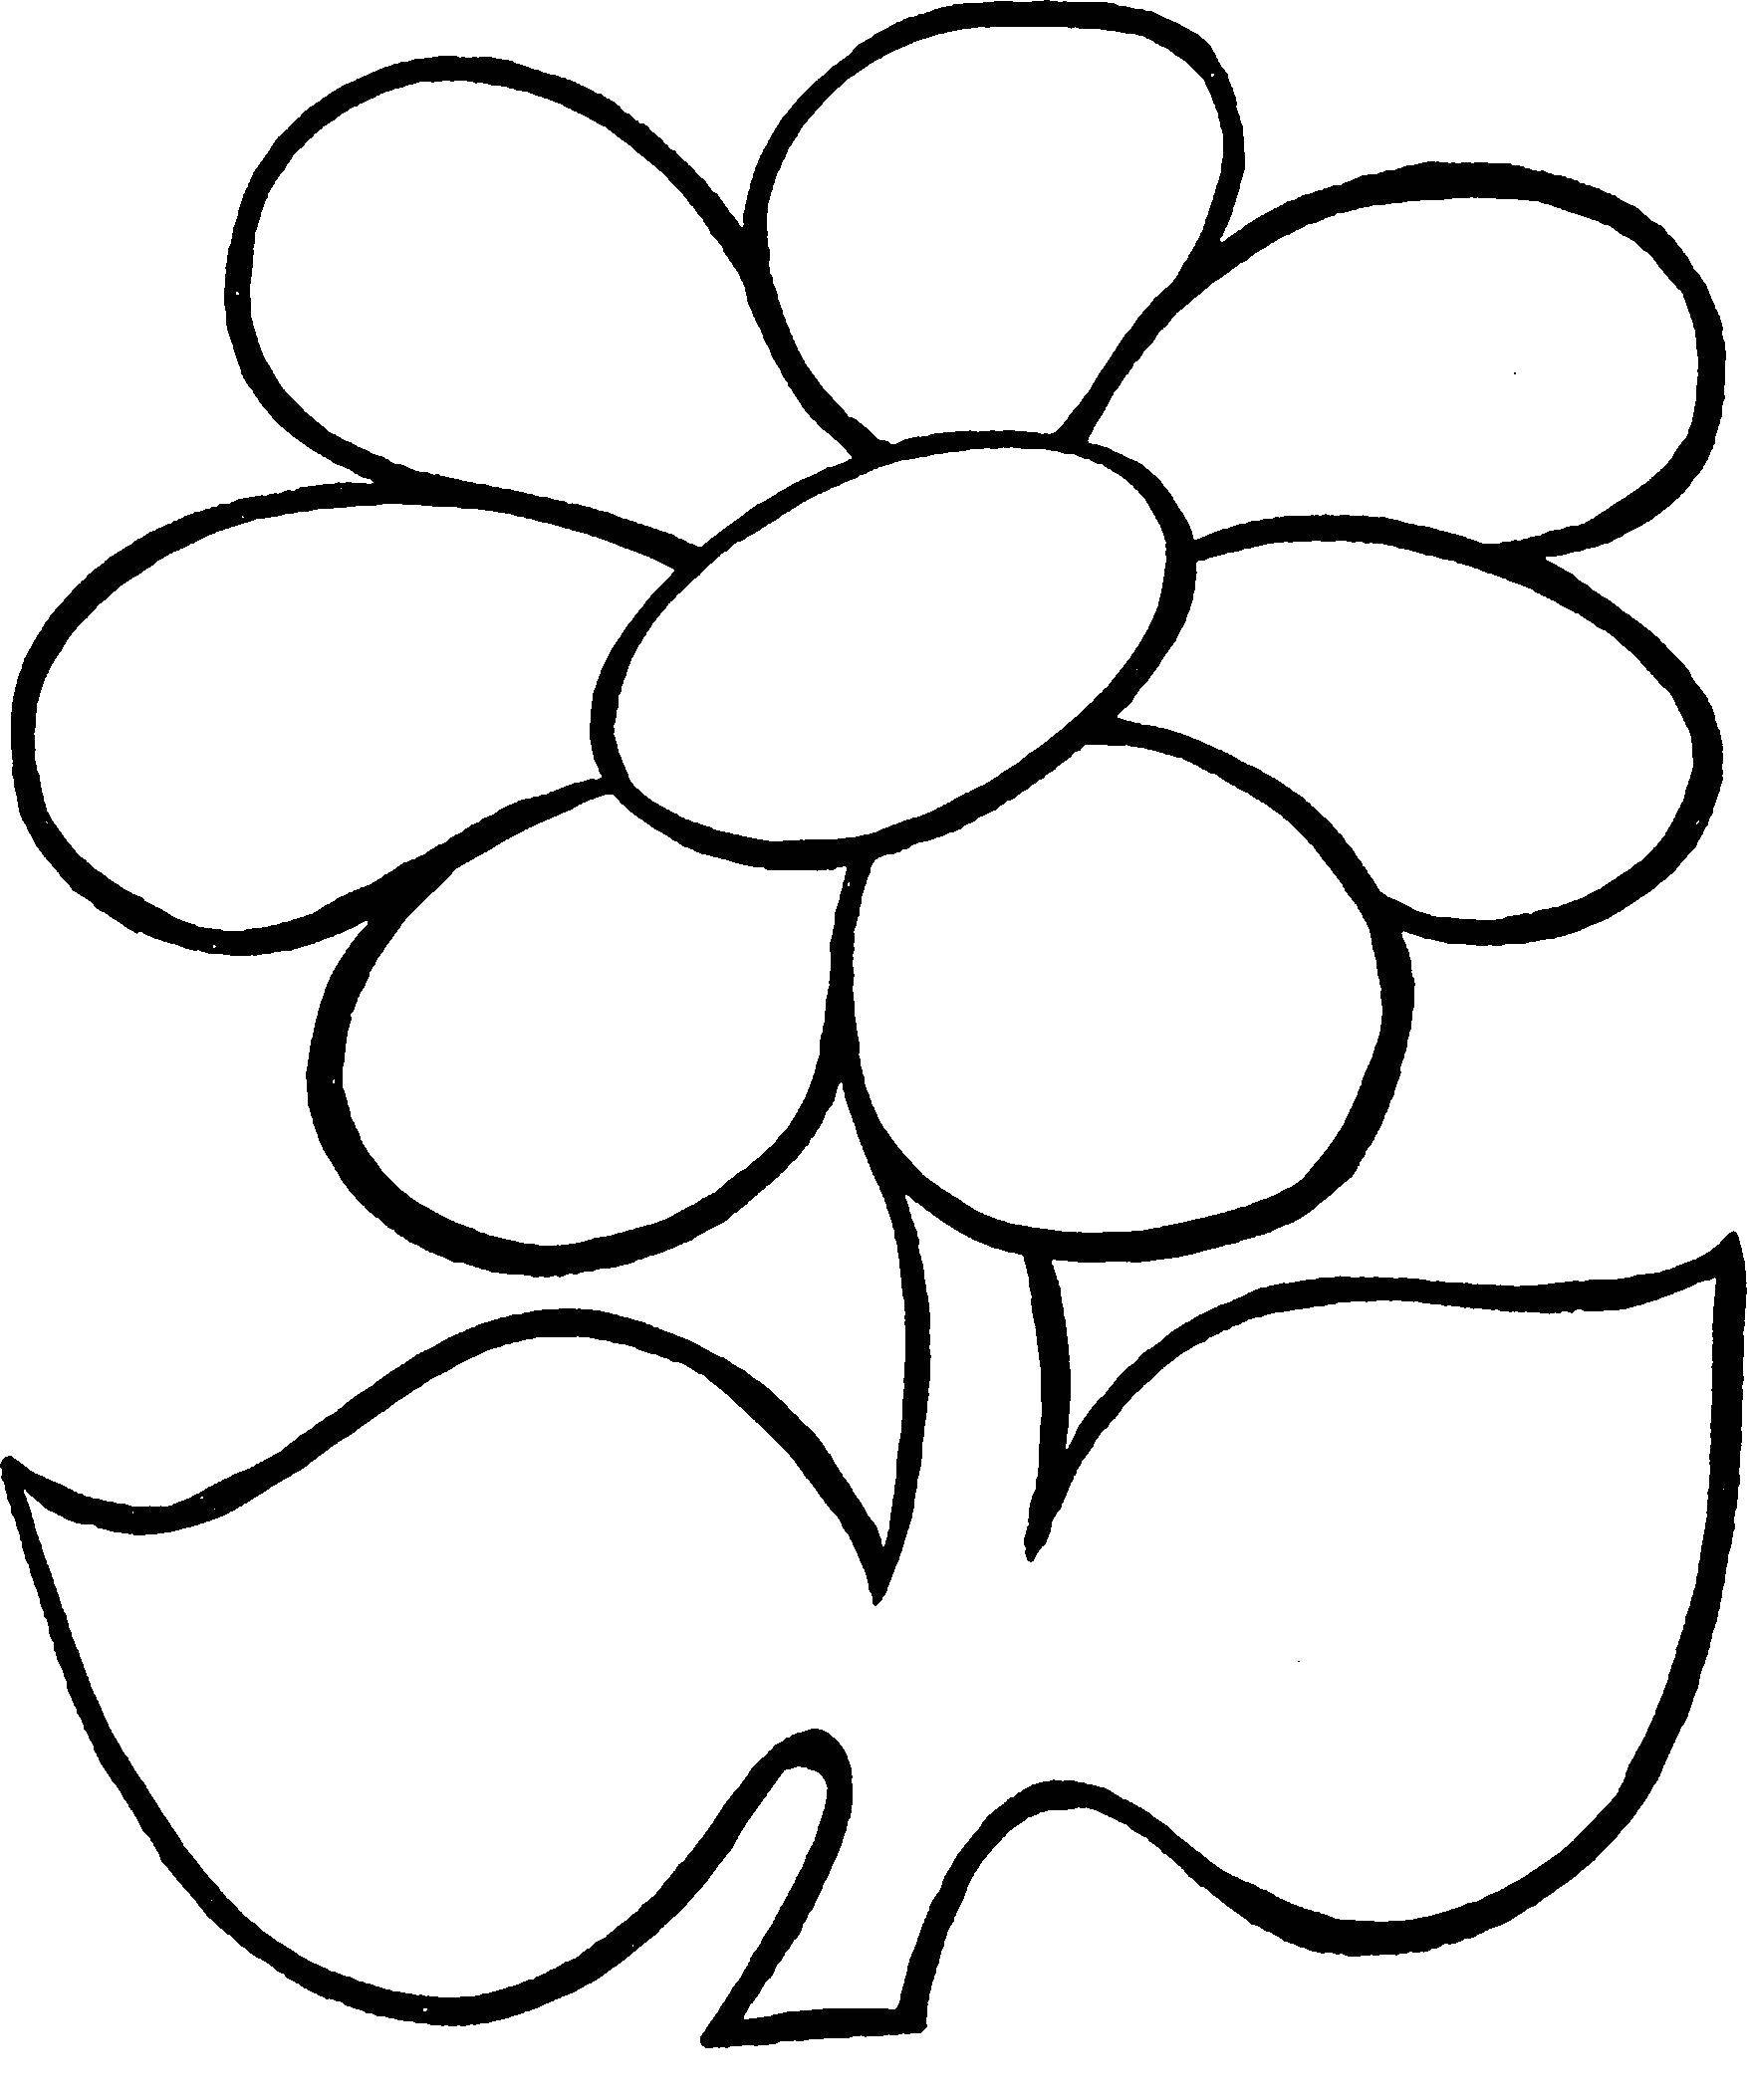 Coloring Flowers. Category flowers. Tags:  flowers.